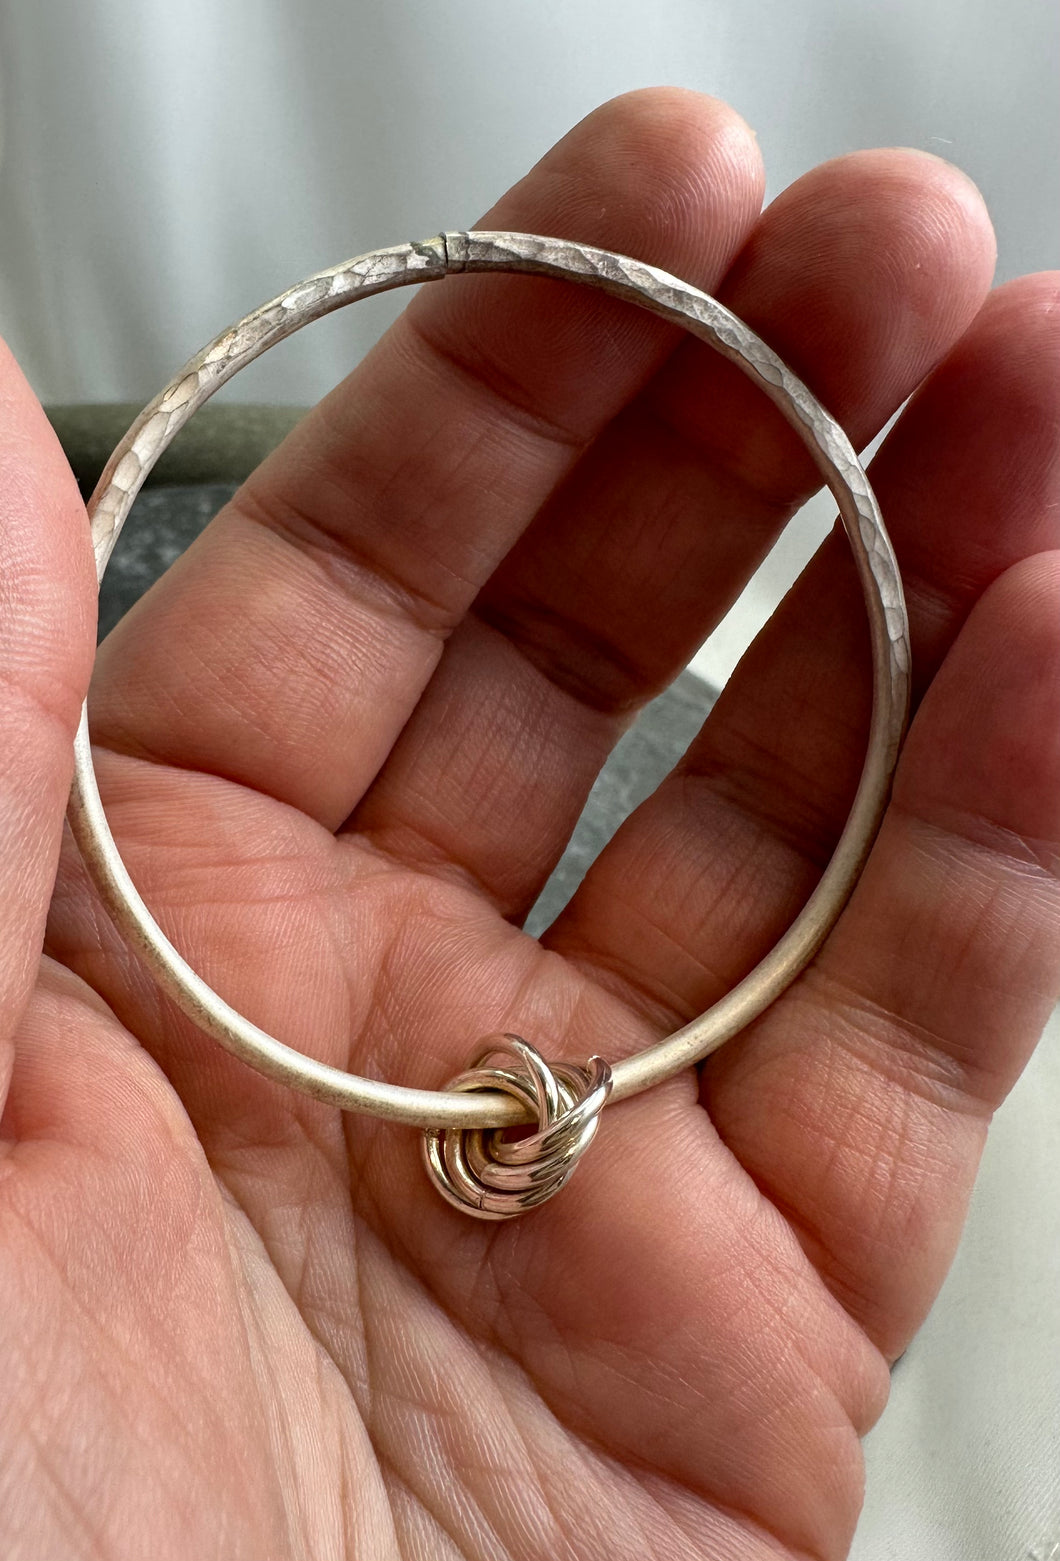 Reflections on the Sea Bangle with hoop charm detail for H